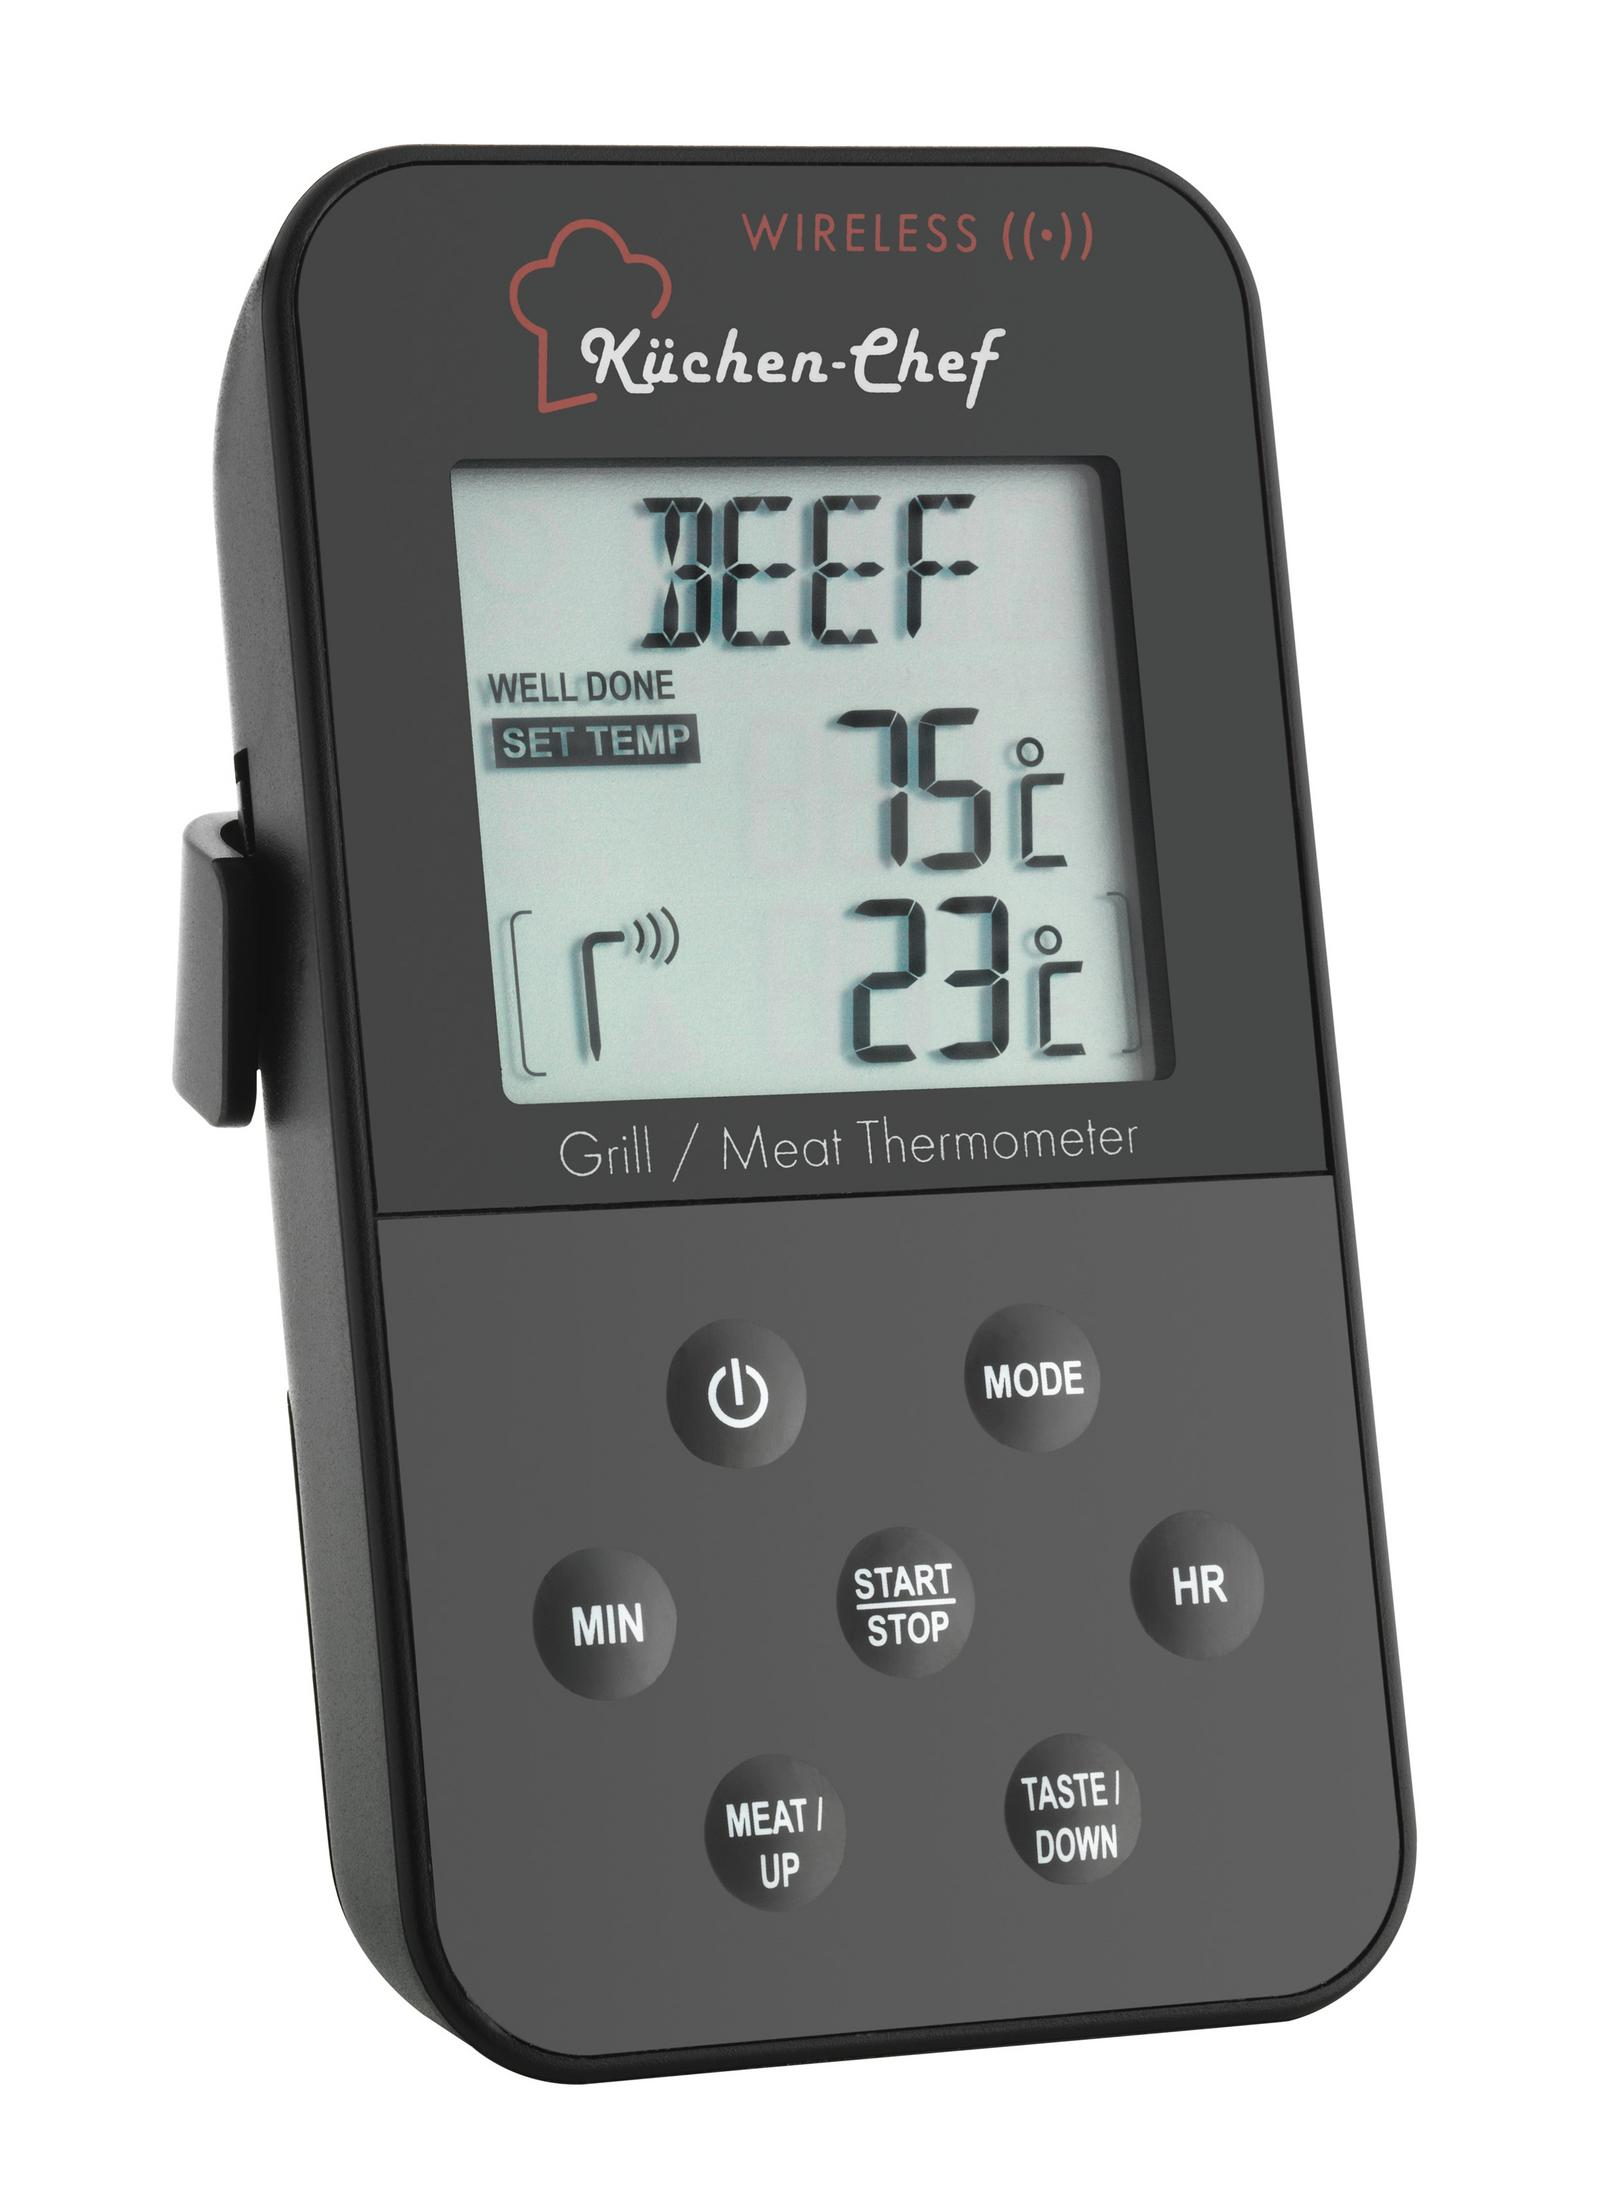 TFA 14.1504 KÜCHEN-CHEF FUNK-GRILL-OFENTHERMOMETER Funk-Grill-Bratenthermometer Schwarz